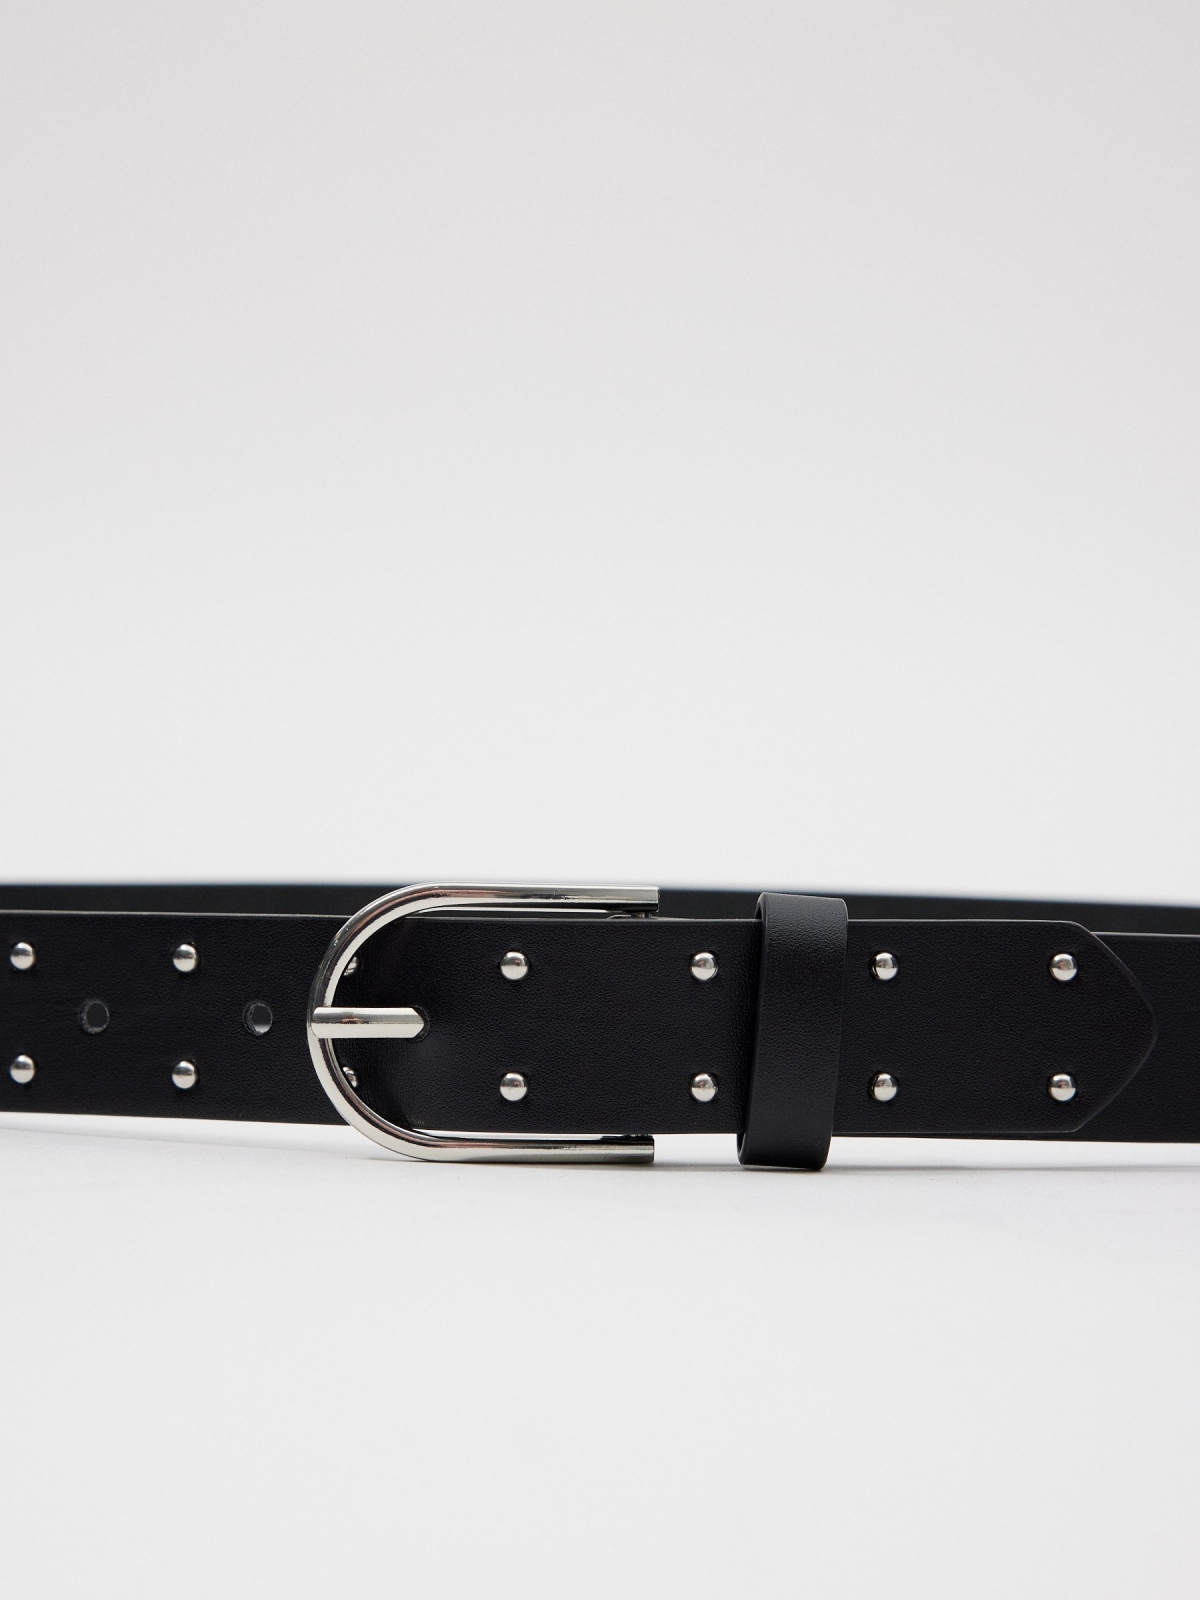 Buckle and studded belt black detail view